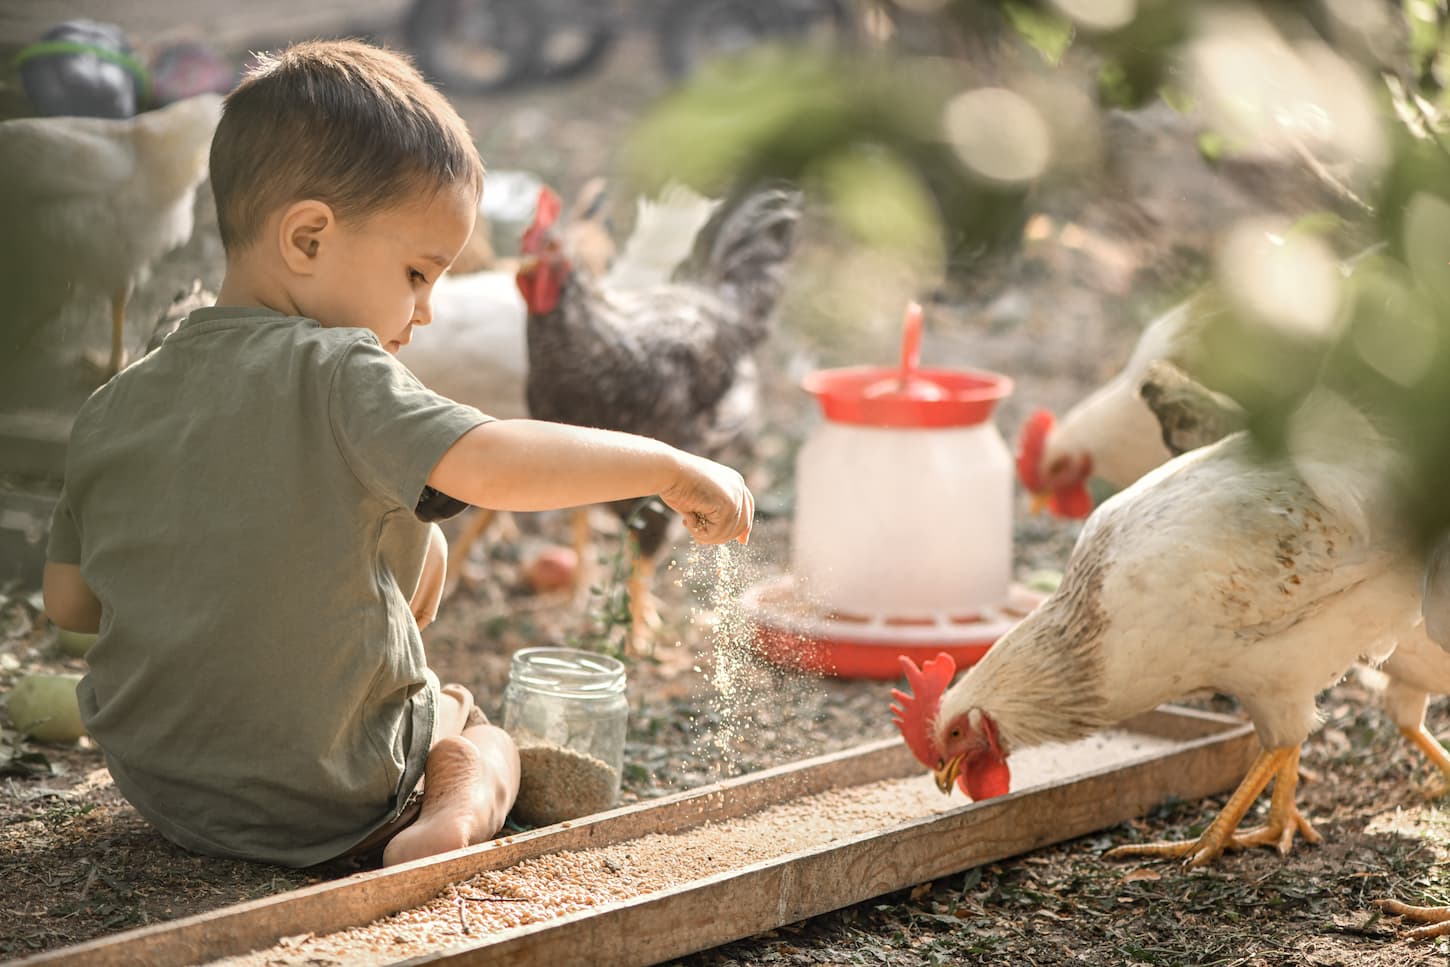 An image of a boy in his grandmother's village feeding the chickens millet.